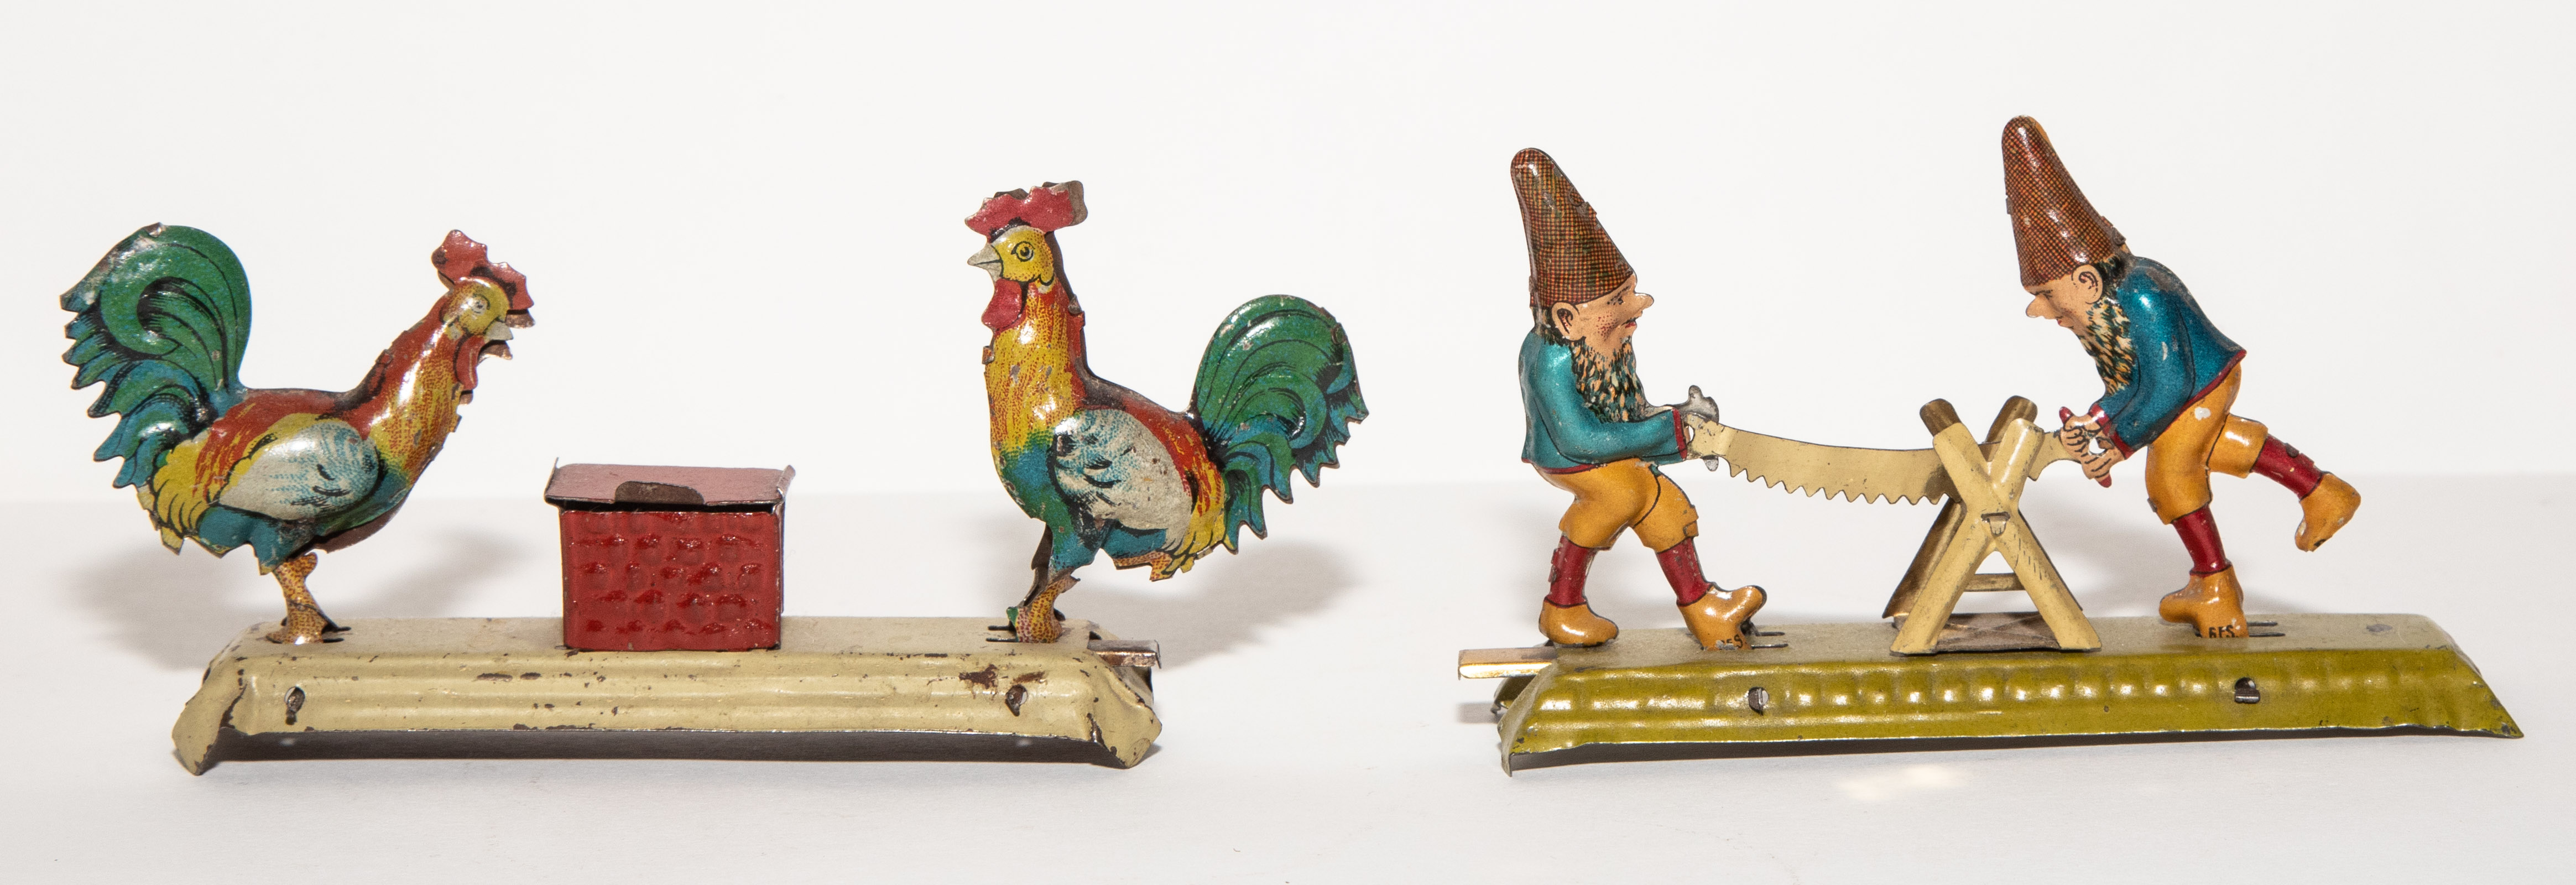 TWO GERMAN ACTION PENNY TOYS Early